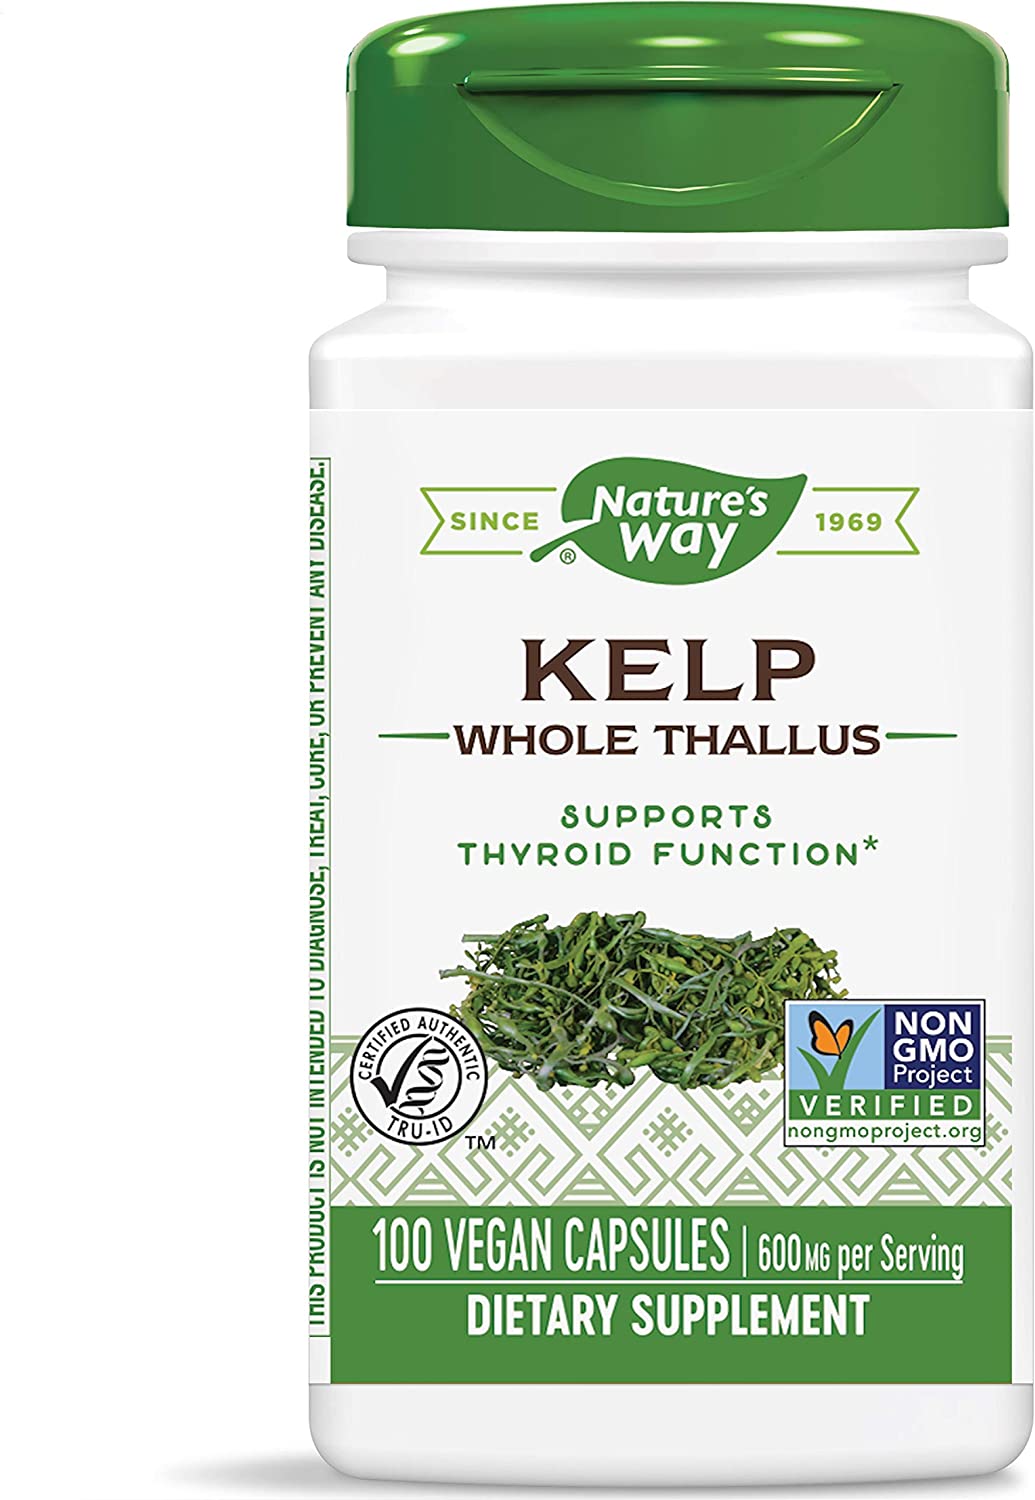 Nature's Way Kelp 600 mg Non-GMO Project Verified Gluten Free Vegetarian; 180 Count (Packaging May Vary)